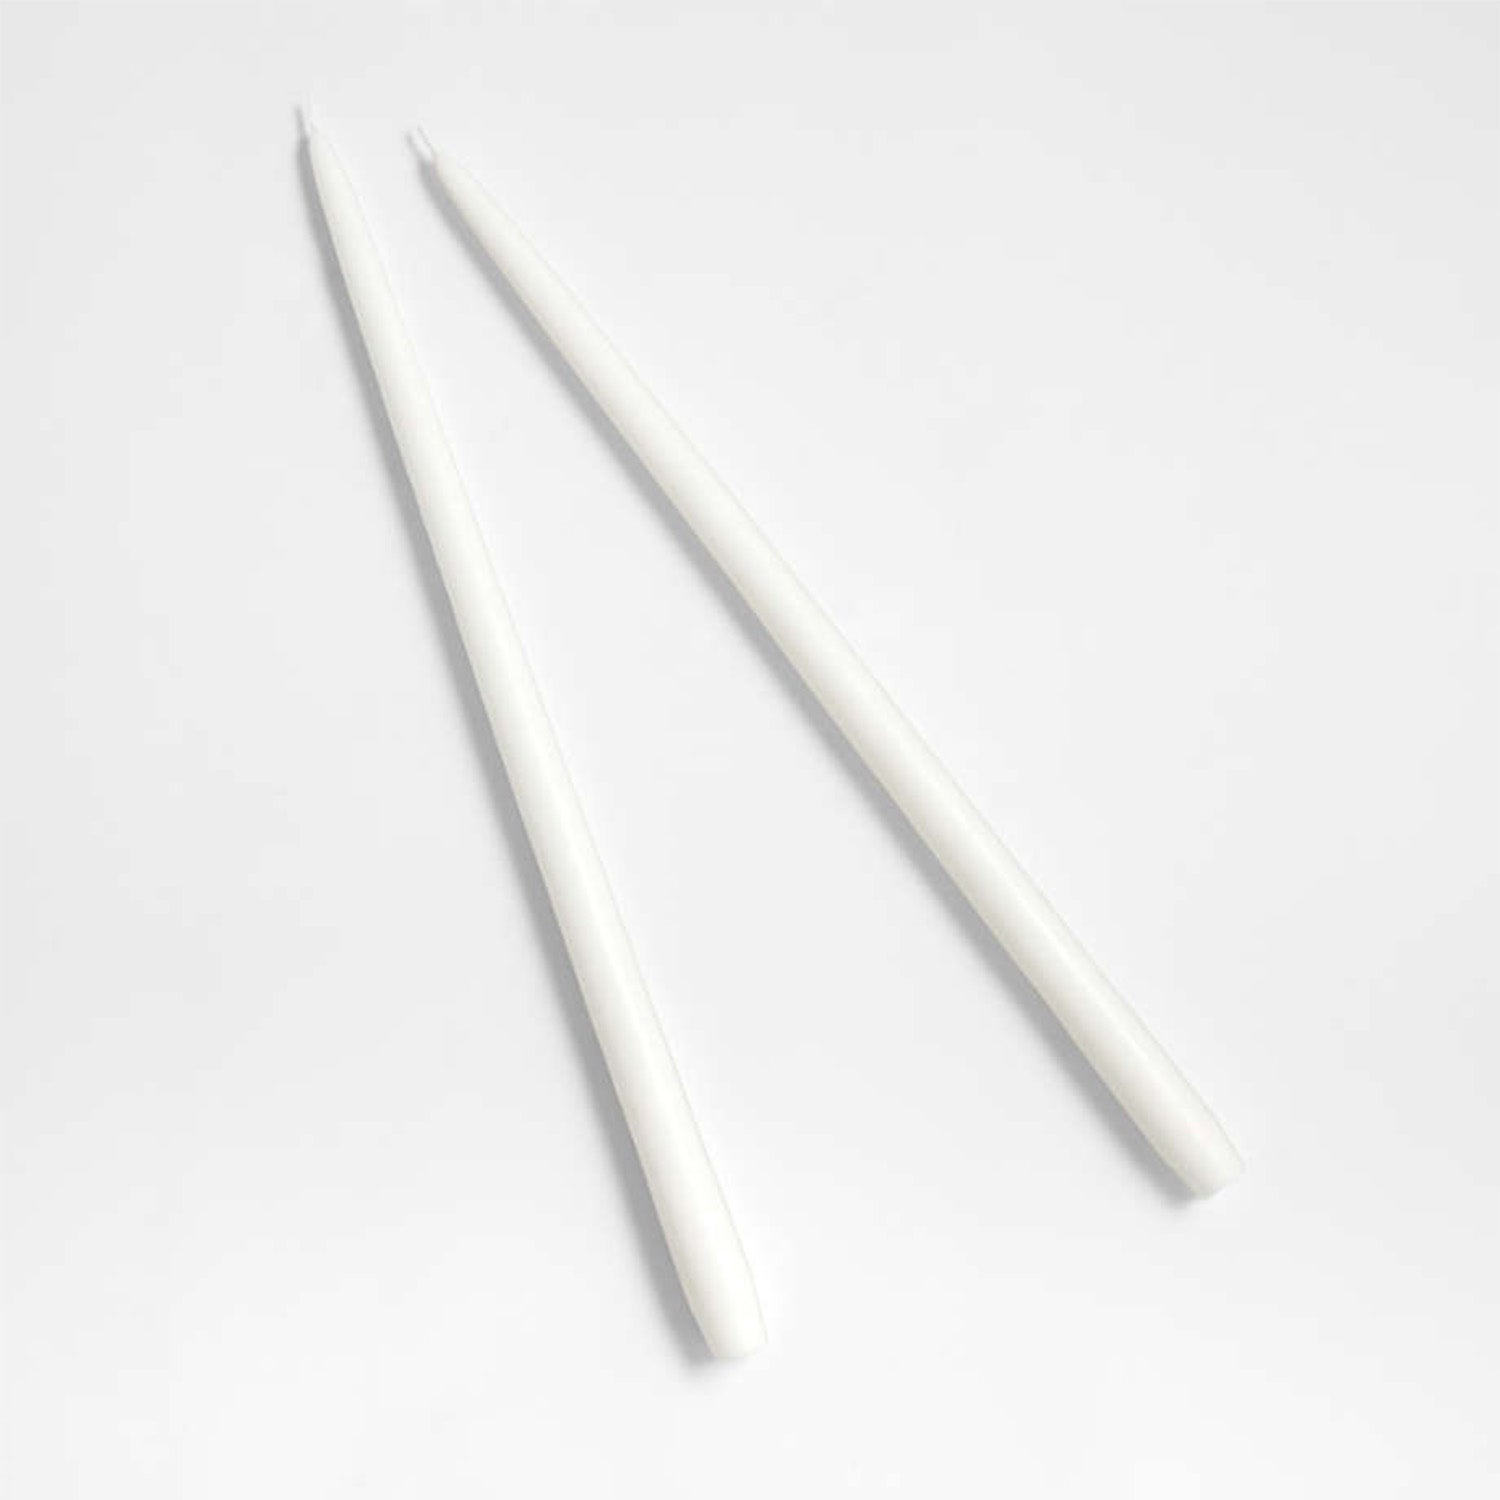 18" Dipped White Taper Candles, Set of 2 by Athena Calderone